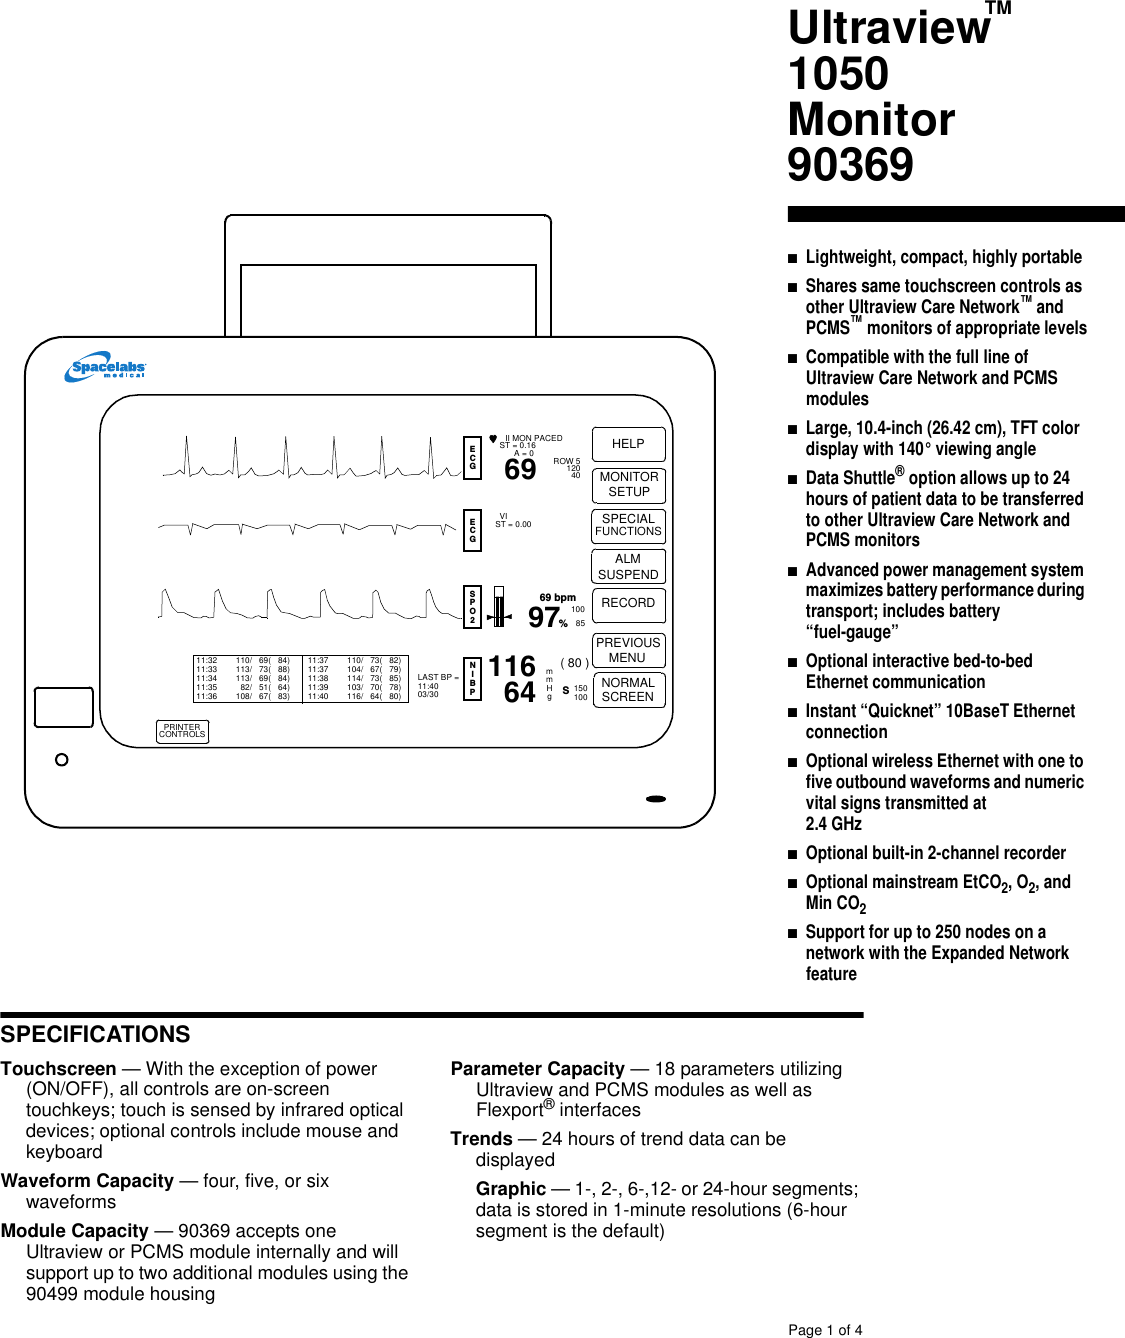 SPECIFICATIONSPage 1of 4Touchscreen —With the exception of power(ON/OFF), all controls are on-screentouchkeys; touch is sensed by infrared opticaldevices; optional controls include mouse andkeyboardWaveform Capacity —four, five, or sixwaveformsModule Capacity —90369 accepts oneUltraview or PCMS module internally and willsupport up to two additional modules using the90499 module housingParameter Capacity —18 parameters utilizingUltraview and PCMS modules as well asFlexport®interfacesTrends —24 hours of trend data can bedisplayedGraphic —1-, 2-, 6-,12- or 24-hour segments;data is stored in 1-minute resolutions (6-hoursegment is the default)Ultraview1050Monitor90369■Lightweight, compact, highly portable■Shares same touchscreen controls asother Ultraview Care Network™andPCMS™monitors of appropriate levels■Compatible with the full line ofUltraview Care Network and PCMSmodules■Large, 10.4-inch (26.42 cm), TFT colordisplay with 140° viewing angle■Data Shuttle®option allows up to 24hours of patient data to be transferredto other Ultraview Care Network andPCMS monitors■Advanced power management systemmaximizesbatteryperformanceduringtransport; includes battery“fuel-gauge”■Optional interactive bed-to-bedEthernet communication■Instant “Quicknet” 10BaseT Ethernetconnection■Optional wireless Ethernet withone tofive outbound waveformsand numericvital signs transmitted at2.4 GHz■Optional built-in 2-channel recorder■Optional mainstream EtCO2, O2,andMin CO2■Support for up to 250 nodes on anetwork with the Expanded NetworkfeaturePRINTERCONTROLSPREVIOUSMENUNORMALSCREENSPECIALFUNCTIONSALM MONITORSETUPRECORDHELP97 100SPO2ECG8569 bpm(80 )ECGNIBPII MON PACEDST =0.16A = 0 ROW 512040VIST =0.00%1166469LAST BP =11:4003/30mmHg150100S11:3211:3311:3411:3511:36110/ 69( 84)113/ 73( 88)113/ 69( 84)82/ 51( 64)108/ 67( 83)11:3711:3711:3811:3911:40110/ 73( 82)104/ 67( 79)114/ 73( 85)103/ 70( 78)116/ 64( 80)SUSPENDTM